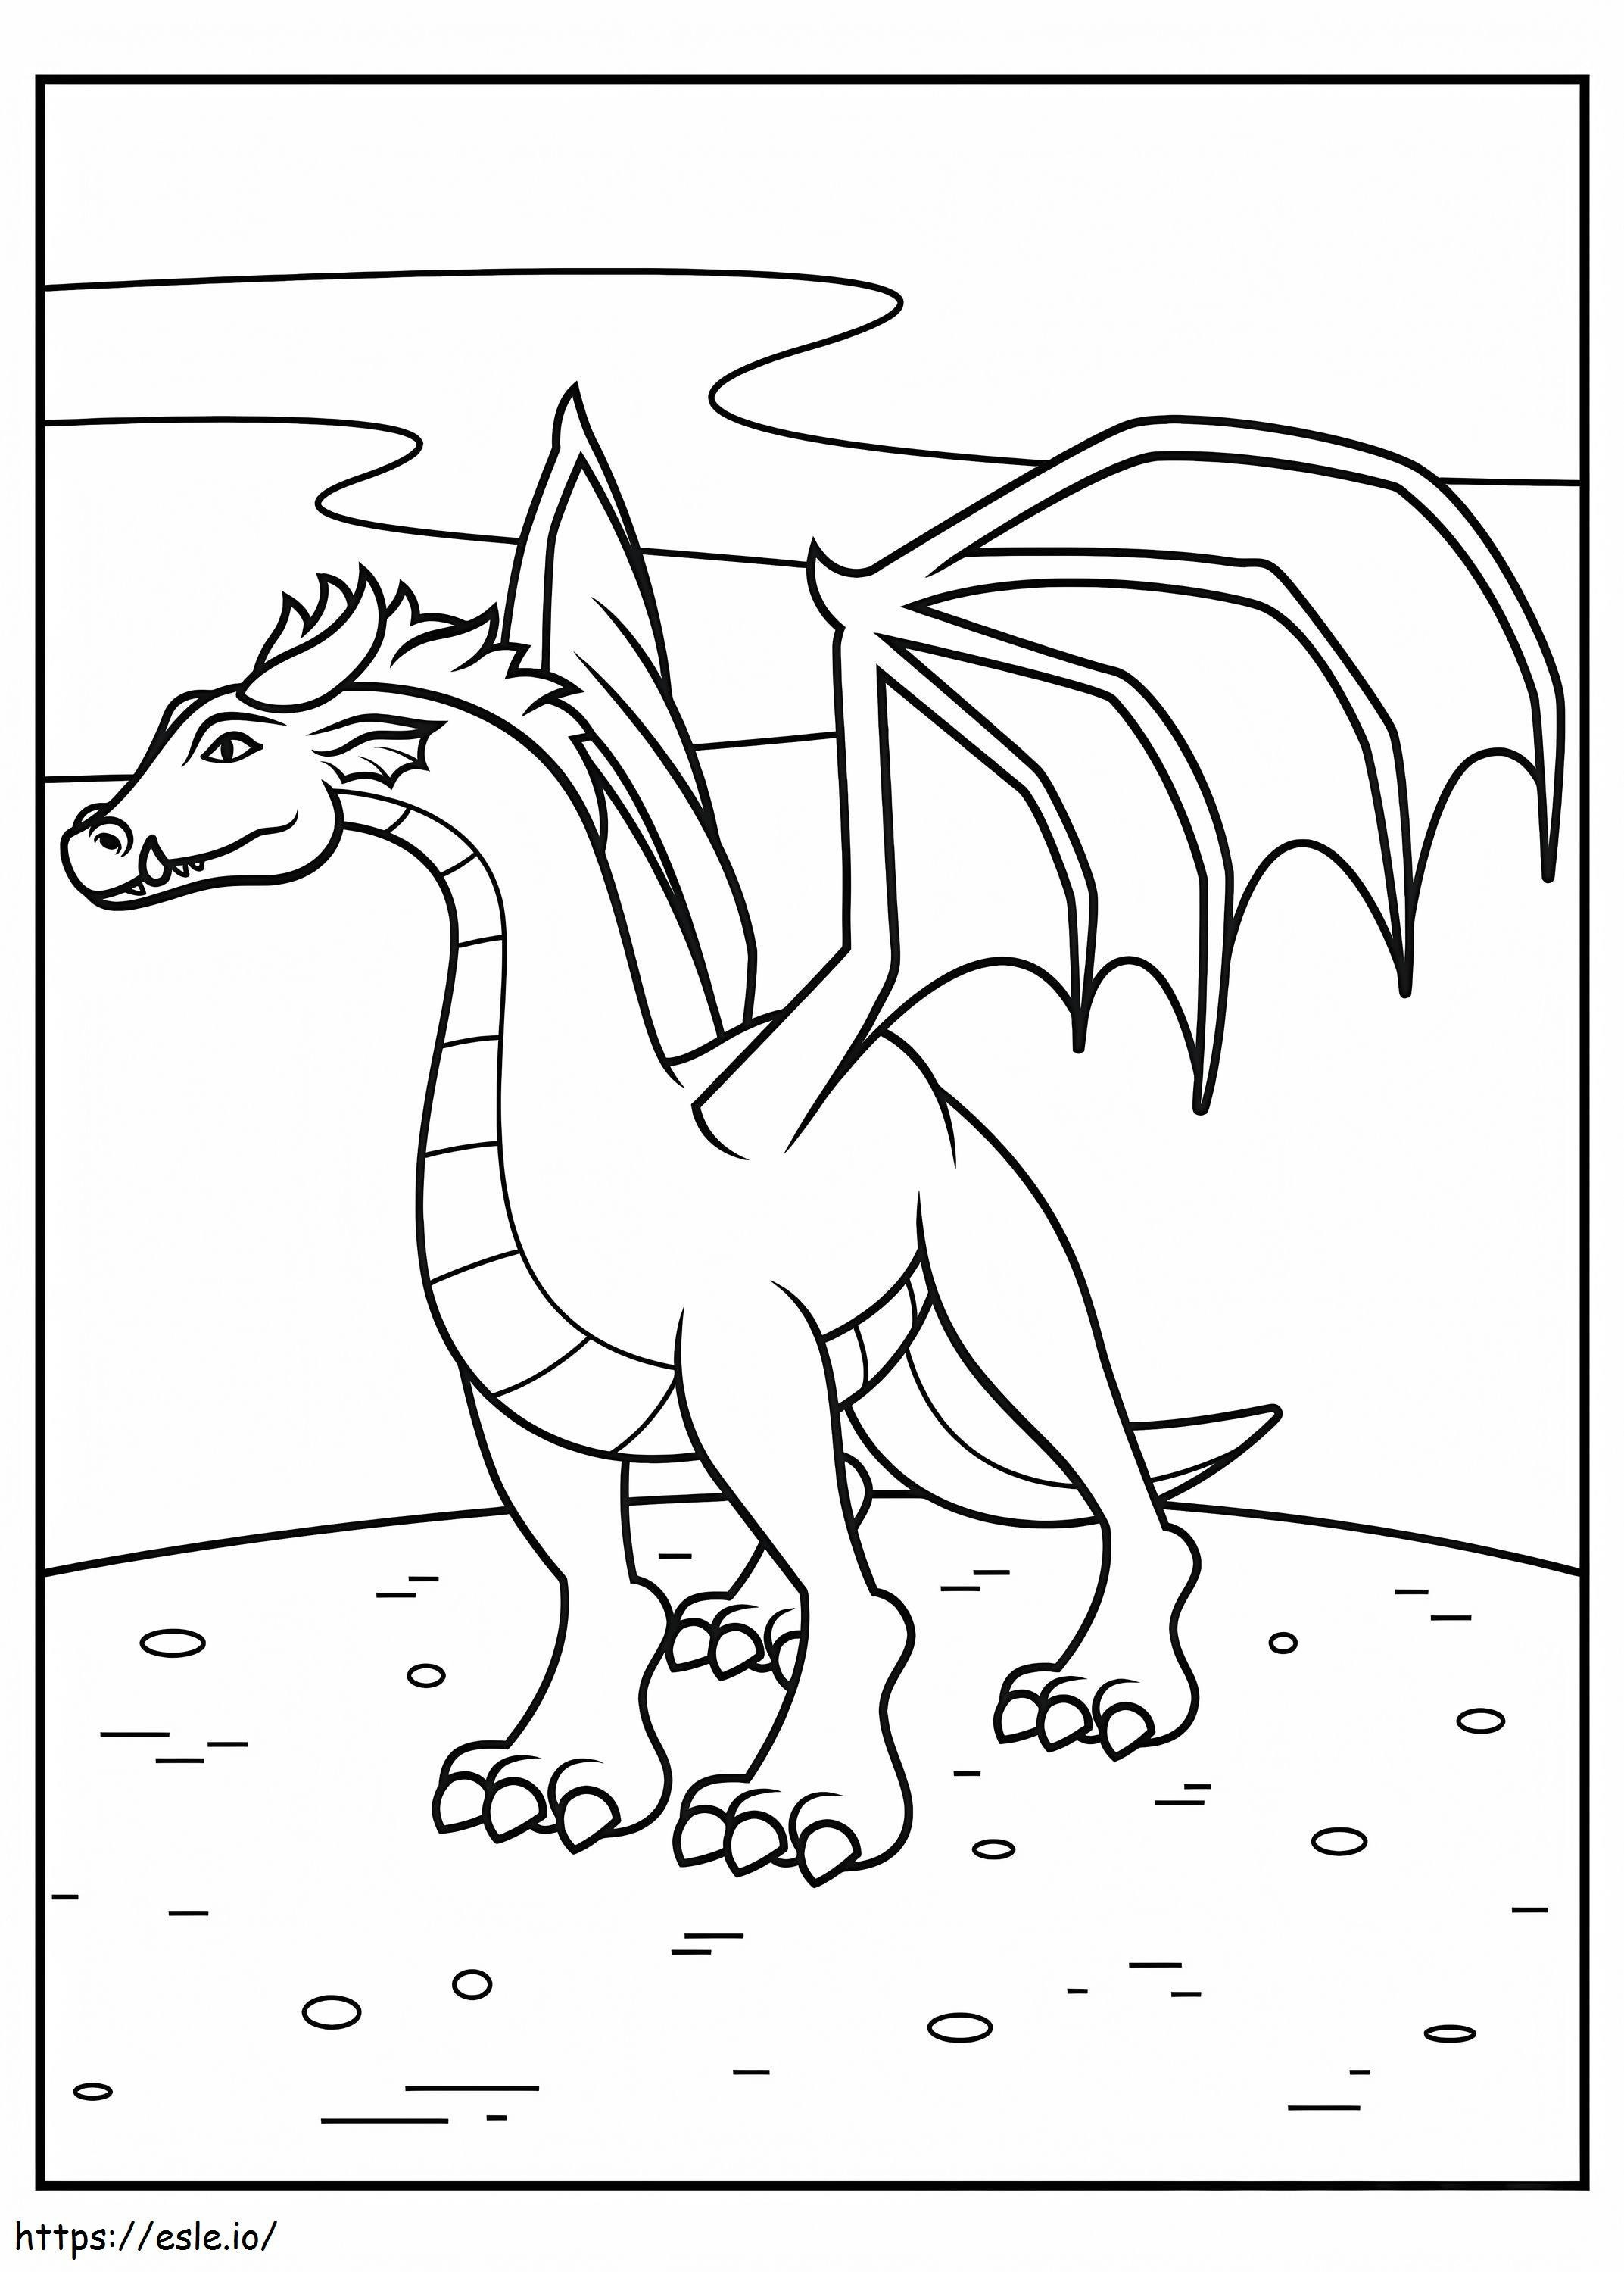 Perfect Dragon coloring page